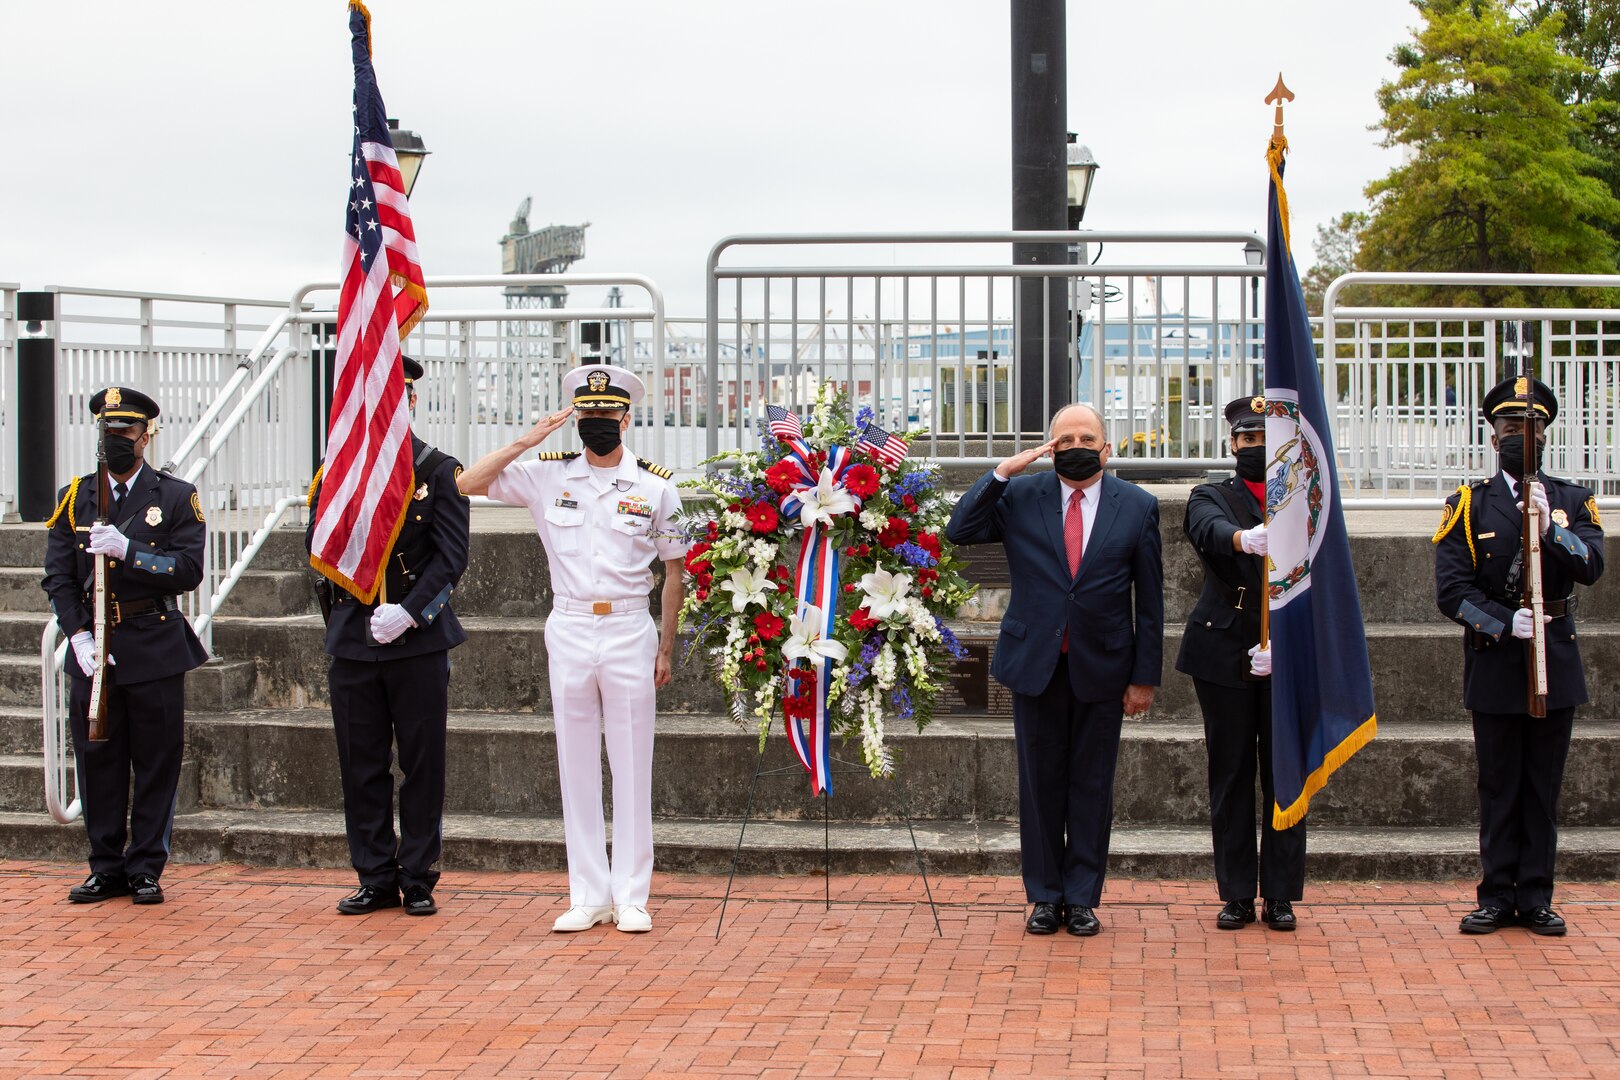 The Honorable Mayor John Rowe, City of Portsmouth, and Norfolk Naval Shipyard Commander Capt. Kai Torkelson lay a wreath for the fallen at High Street Landing Flagpole Stage as part of the City of Portsmouth's Memorial Day Observance.